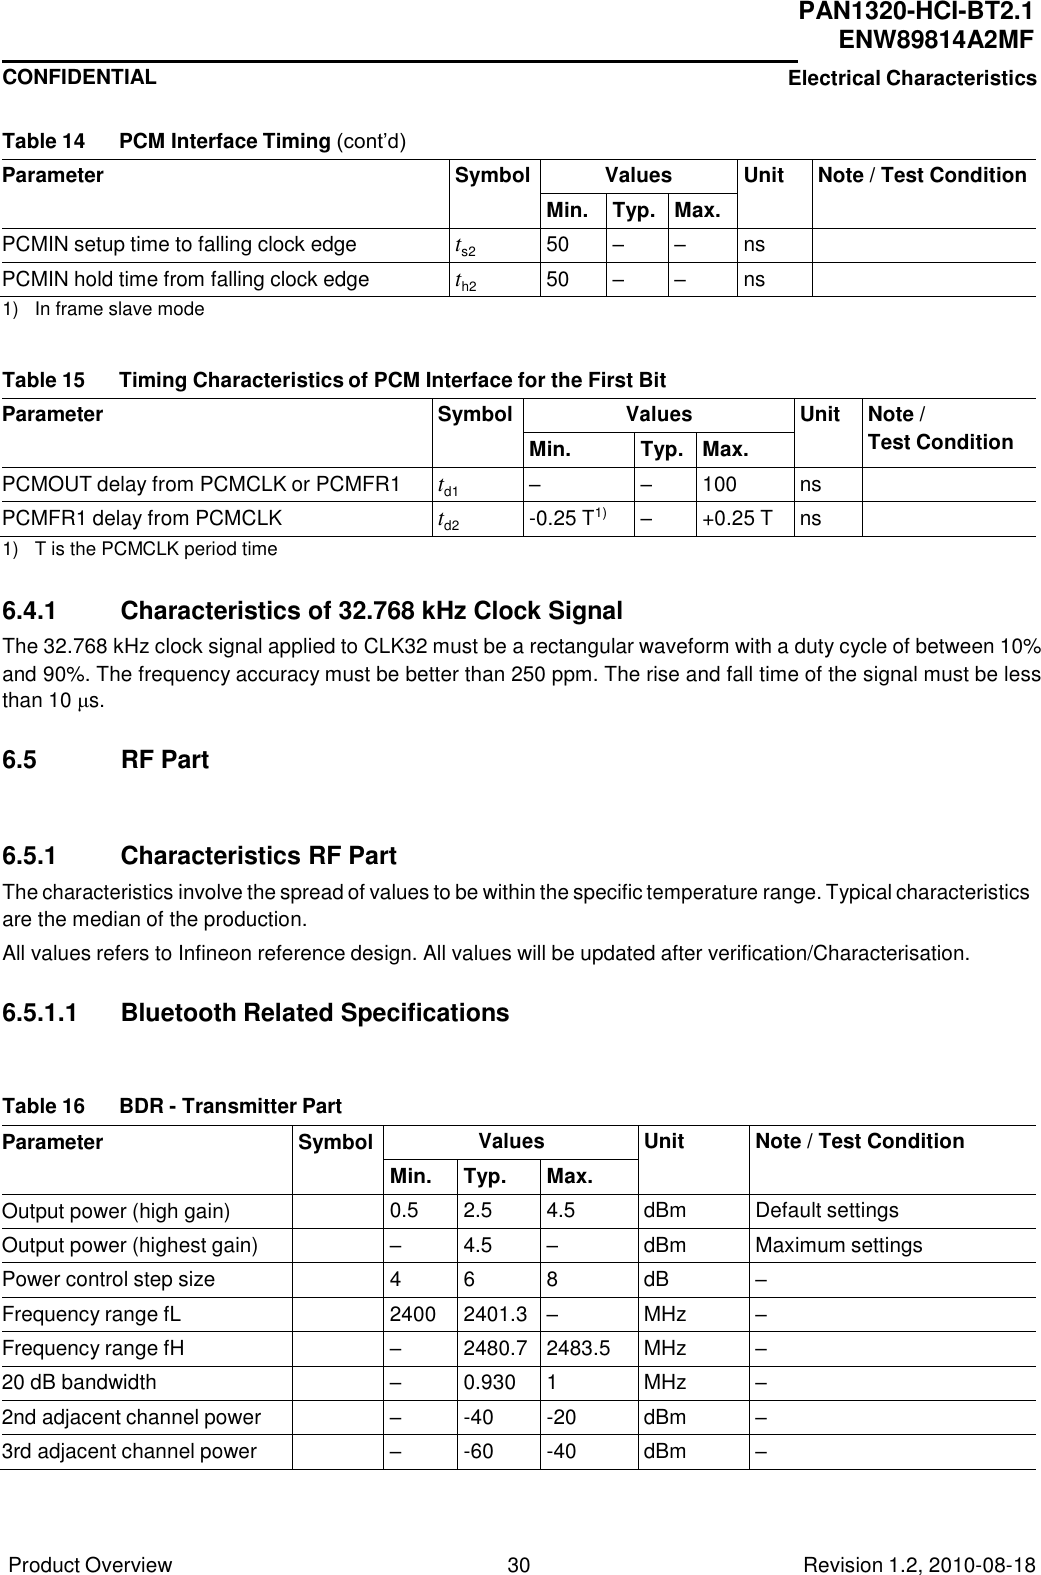   PAN1320-HCI-BT2.1 ENW89814A2MF CONFIDENTIAL Electrical Characteristics Product Overview 30 Revision 1.2, 2010-08-18     Table 14  PCM Interface Timing (cont’d)  Parameter Symbol Values Unit Note / Test Condition Min. Typ. Max. PCMIN setup time to falling clock edge ts2 50 – – ns  PCMIN hold time from falling clock edge th2 50 – – ns  1)   In frame slave mode   Table 15  Timing Characteristics of PCM Interface for the First Bit  Parameter Symbol Values Unit Note / Test Condition Min. Typ. Max. PCMOUT delay from PCMCLK or PCMFR1 td1 – – 100 ns  PCMFR1 delay from PCMCLK td2 -0.25 T1) – +0.25 T ns  1)   T is the PCMCLK period time   6.4.1         Characteristics of 32.768 kHz Clock Signal The 32.768 kHz clock signal applied to CLK32 must be a rectangular waveform with a duty cycle of between 10% and 90%. The frequency accuracy must be better than 250 ppm. The rise and fall time of the signal must be less than 10 μs.  6.5            RF Part    6.5.1         Characteristics RF Part The characteristics involve the spread of values to be within the specific temperature range. Typical characteristics are the median of the production. All values refers to Infineon reference design. All values will be updated after verification/Characterisation.   6.5.1.1      Bluetooth Related Specifications    Table 16  BDR - Transmitter Part  Parameter Symbol Values Unit Note / Test Condition Min. Typ. Max. Output power (high gain)  0.5 2.5 4.5 dBm Default settings Output power (highest gain)  – 4.5 – dBm Maximum settings Power control step size  4 6 8 dB – Frequency range fL  2400 2401.3 – MHz – Frequency range fH  – 2480.7 2483.5 MHz – 20 dB bandwidth  – 0.930 1 MHz – 2nd adjacent channel power  – -40 -20 dBm – 3rd adjacent channel power  – -60 -40 dBm – 